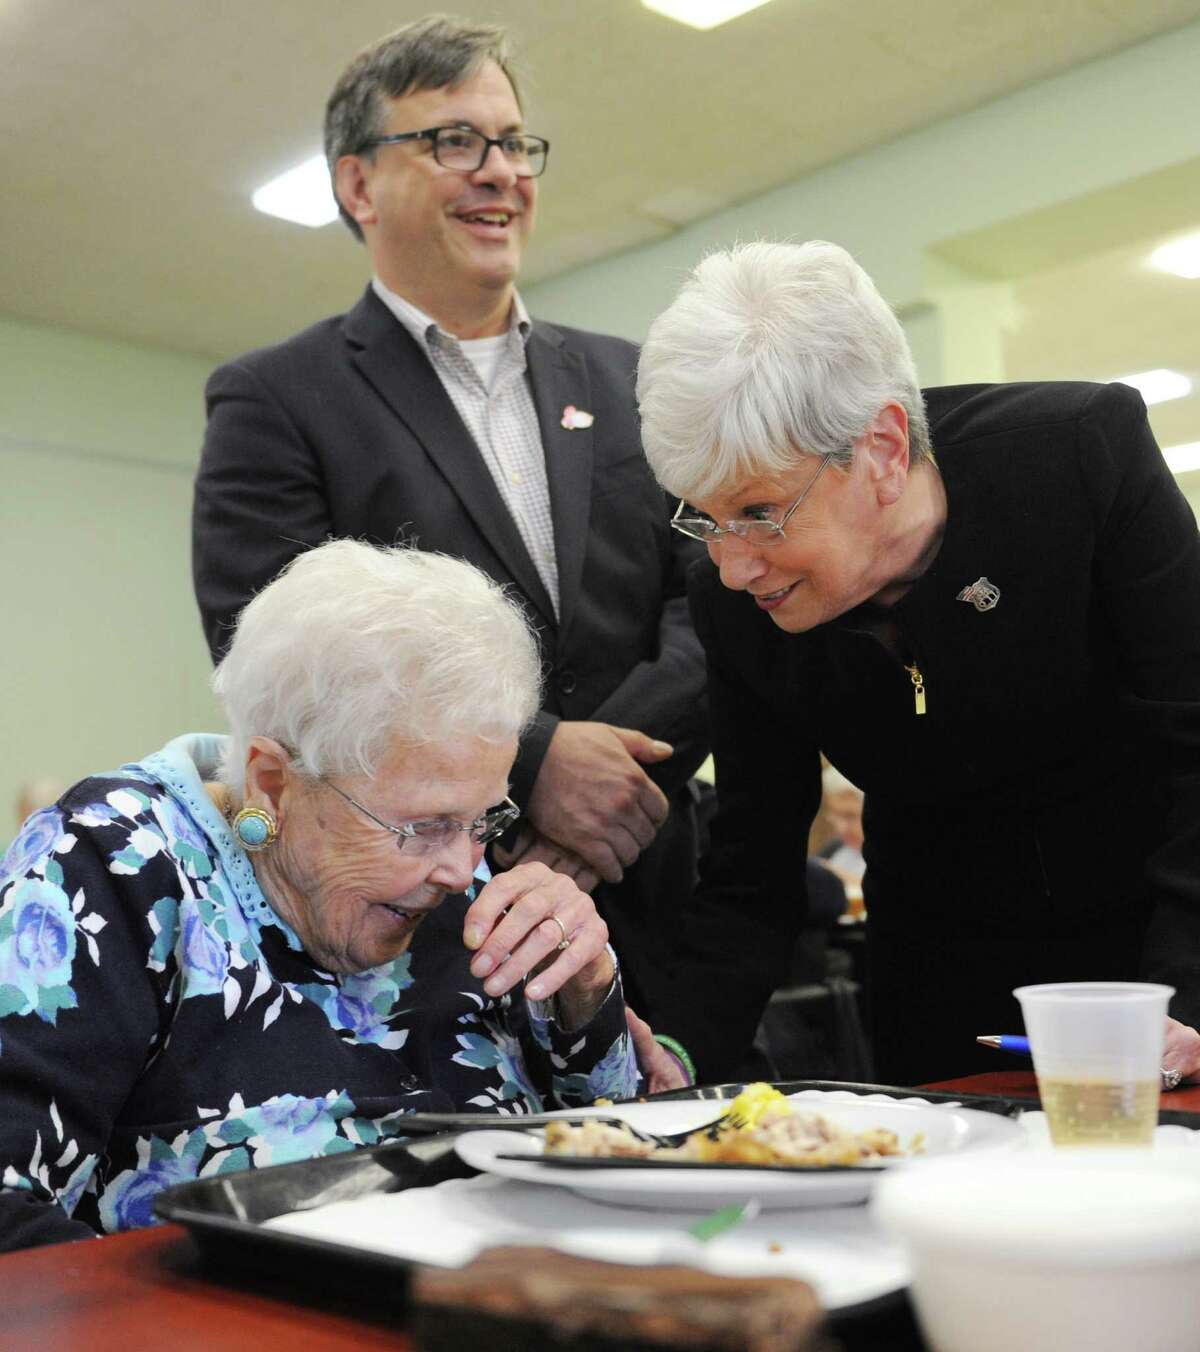 Senior Ruth Wilson, left, laughs with Connecticut Lt. Gov. Nancy Wyman and First Selectman nominee Frank Farricker at the Senior Center in Greenwich, Conn. Tuesday, Oct. 27, 2015. Lt. Gov. Wyman came down from Hartford Tuesday to show her support for Farricker in next Tuesday's election.